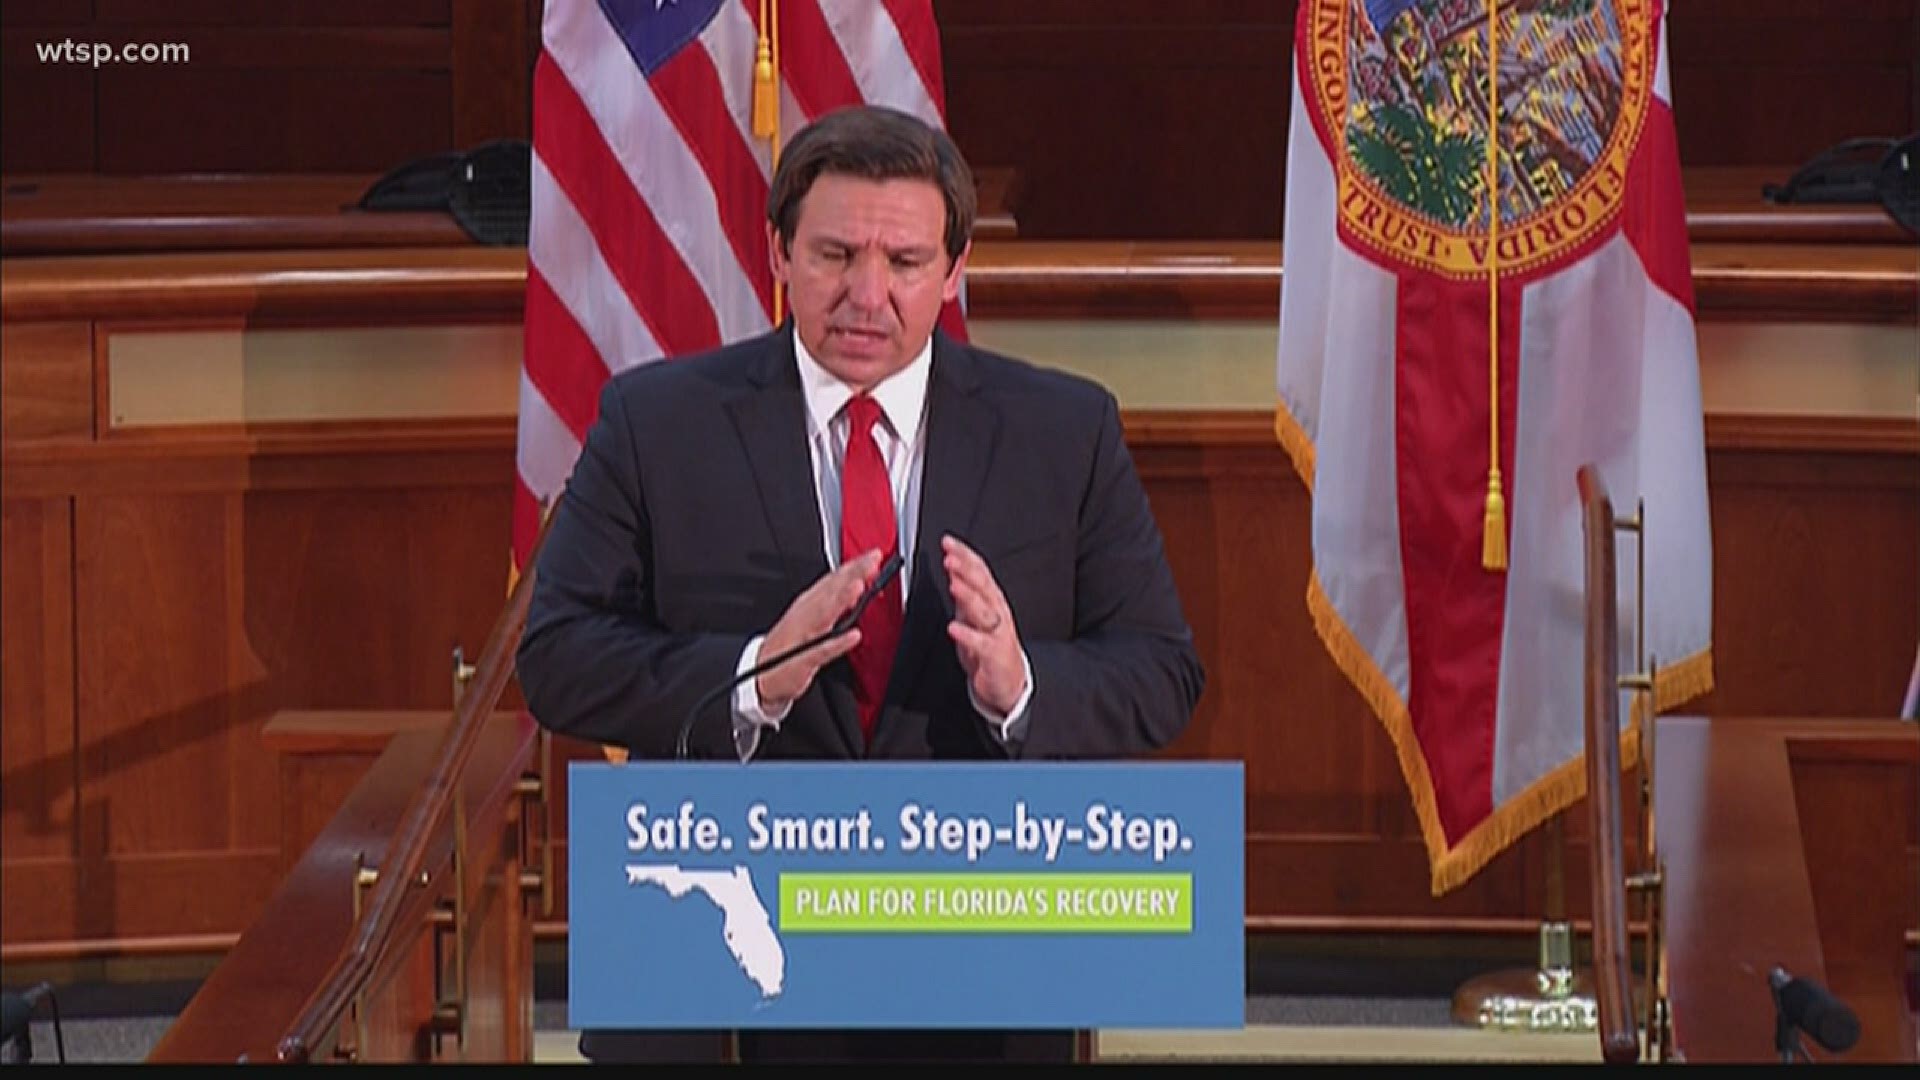 DeSantis on Monday said he will direct Chief Inspector General Melinda Miguel to investigate how the CONNECT system was paid for and built.